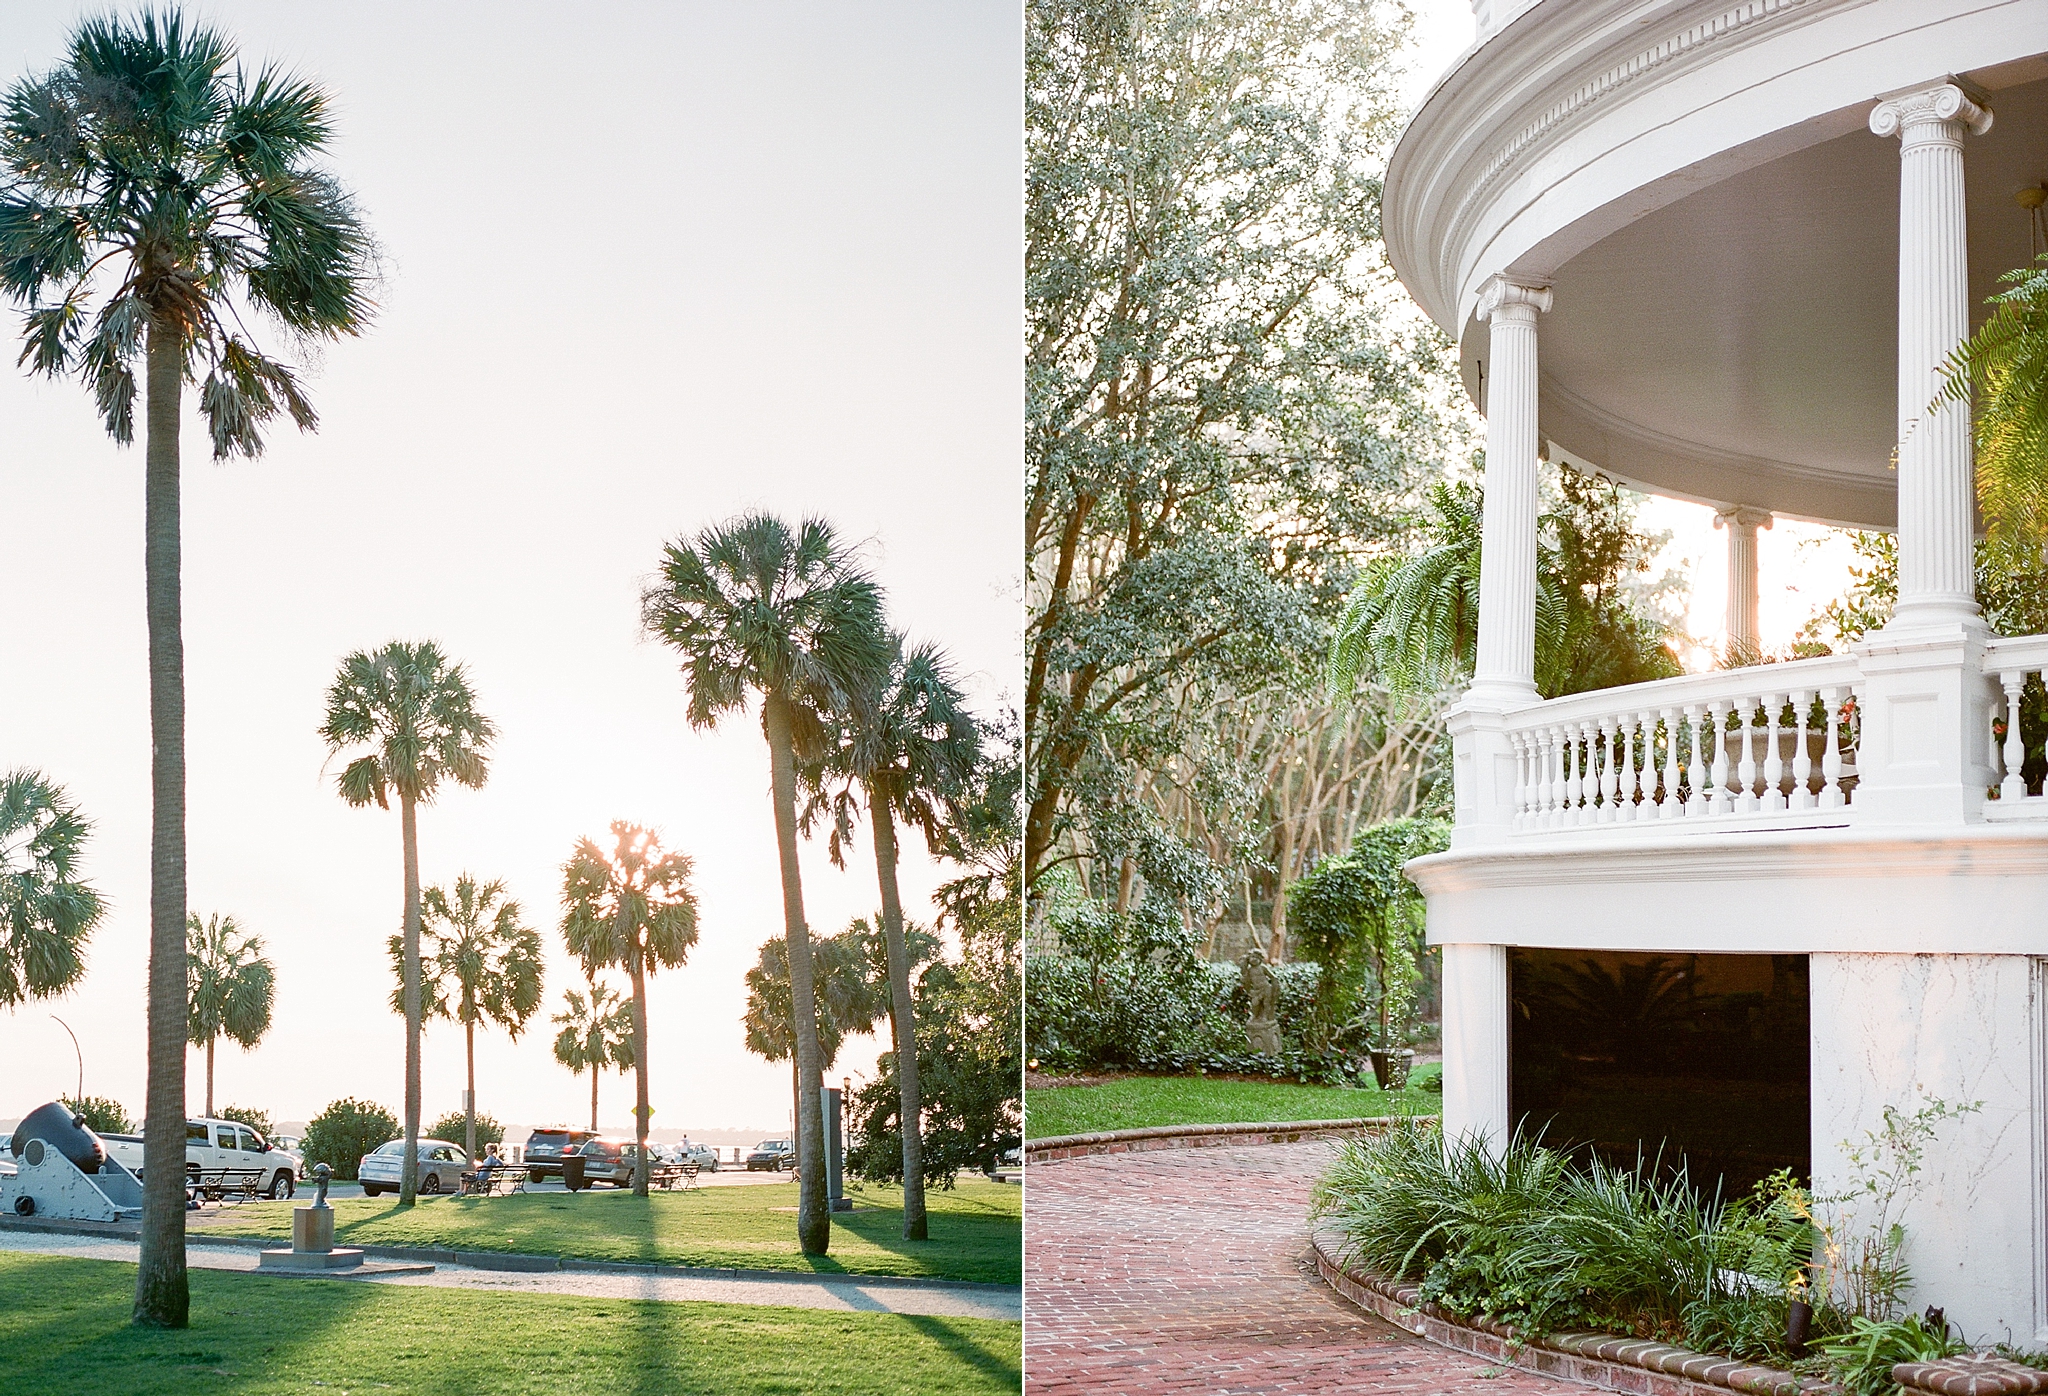 Alicia Lacey, a wedding and anniversary photographer, travels to Charleston, SC to capture this gorgeous city on film.